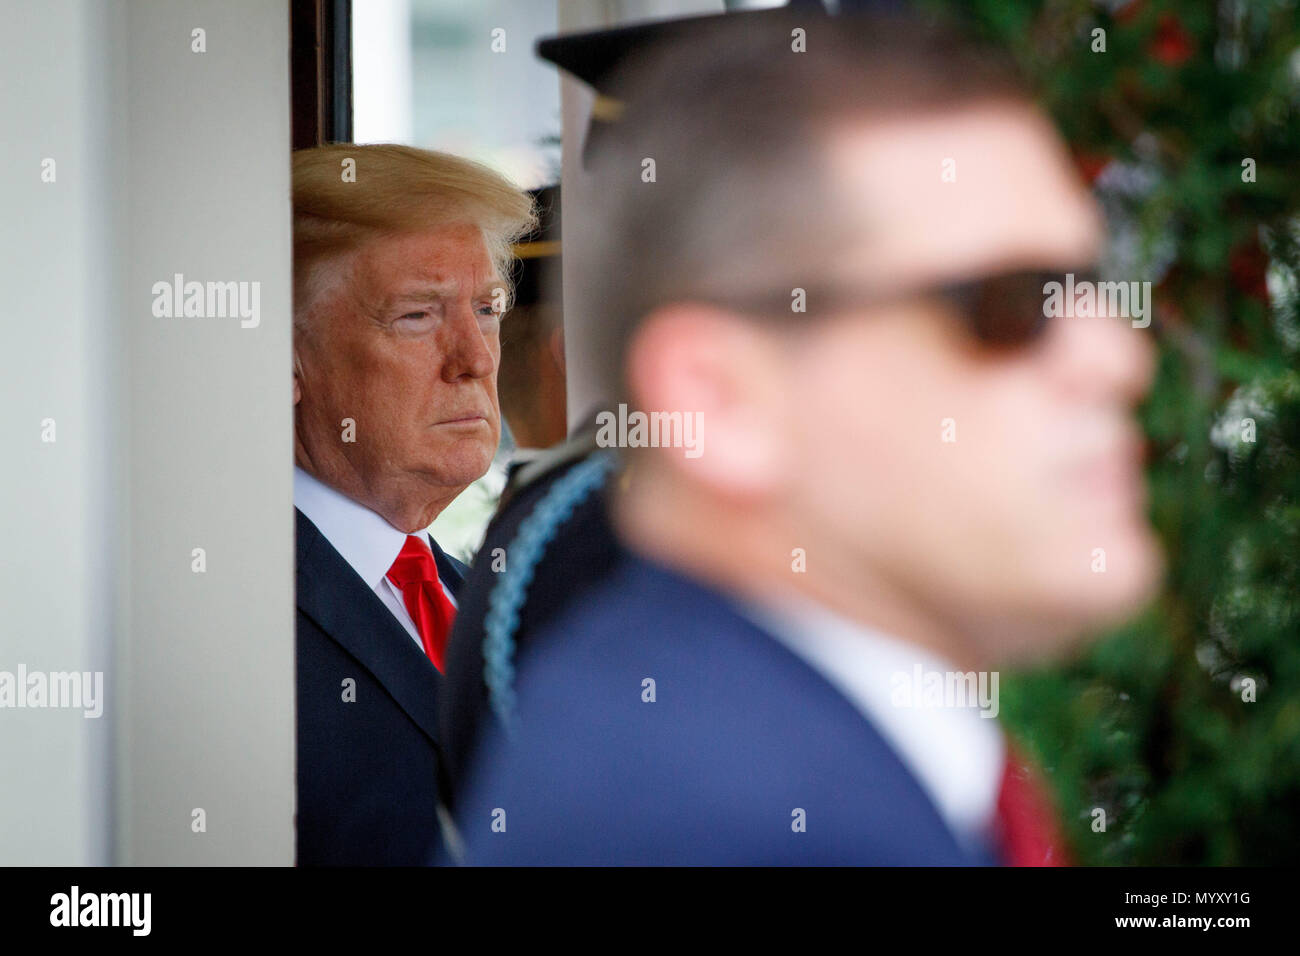 Washington, United States. 07th June, 2018. President Donald Trump waits for the arrival of Japanese Prime Minister Shinzo Abe prior to a bilateral meeting at the White House. Credit: Michael Candelori/Pacific Press/Alamy Live News Stock Photo